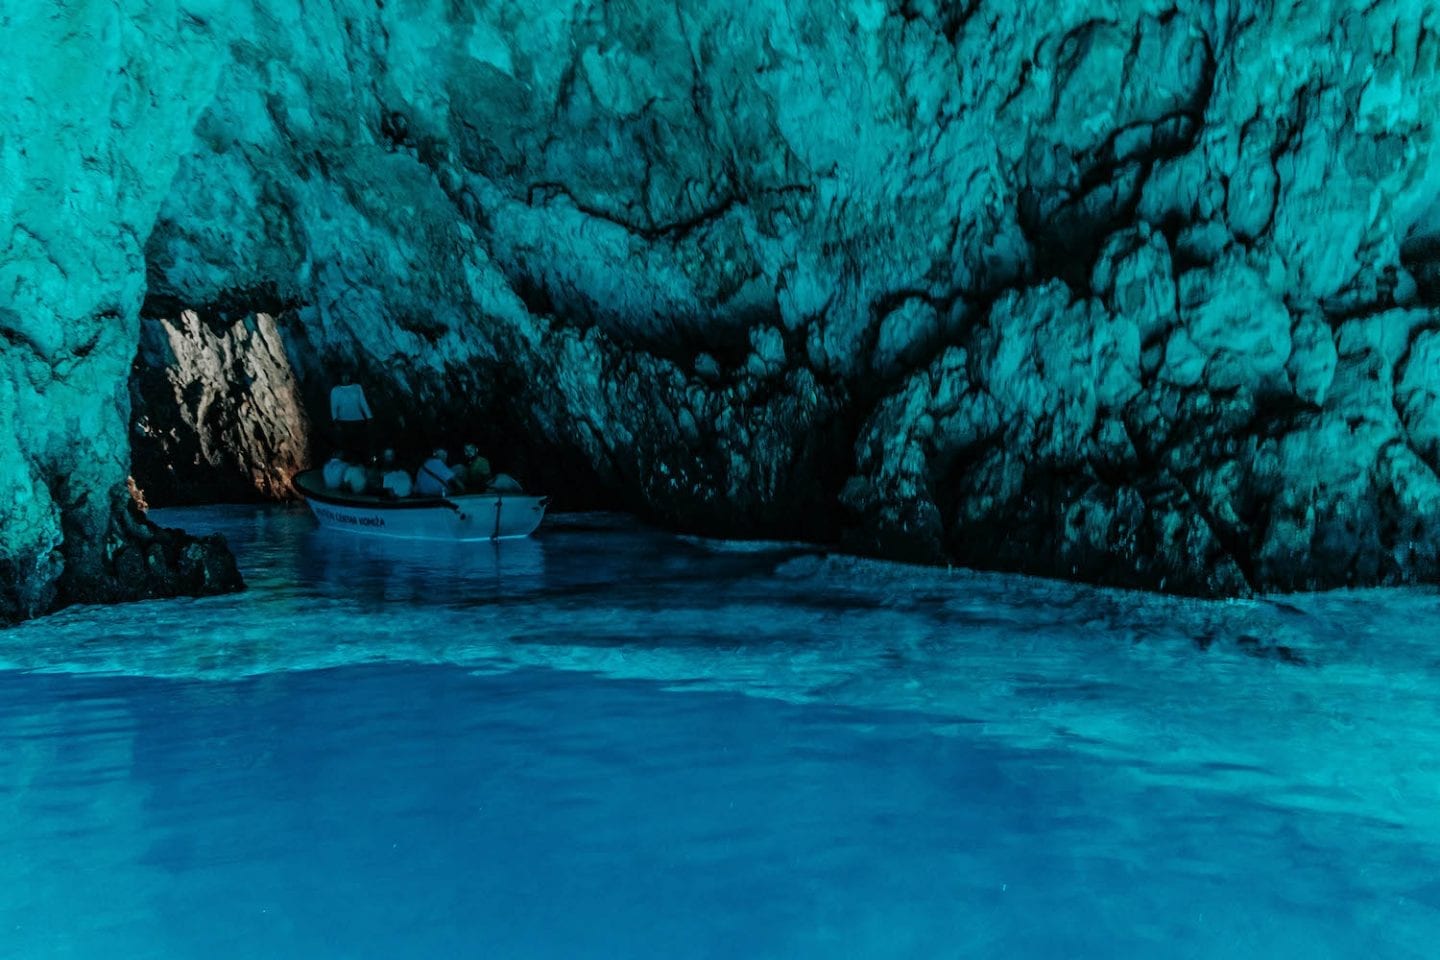 Dark cave lit up by blue water with small wooden boat of people drifting through the cavern - Blue Cave in Croatia 